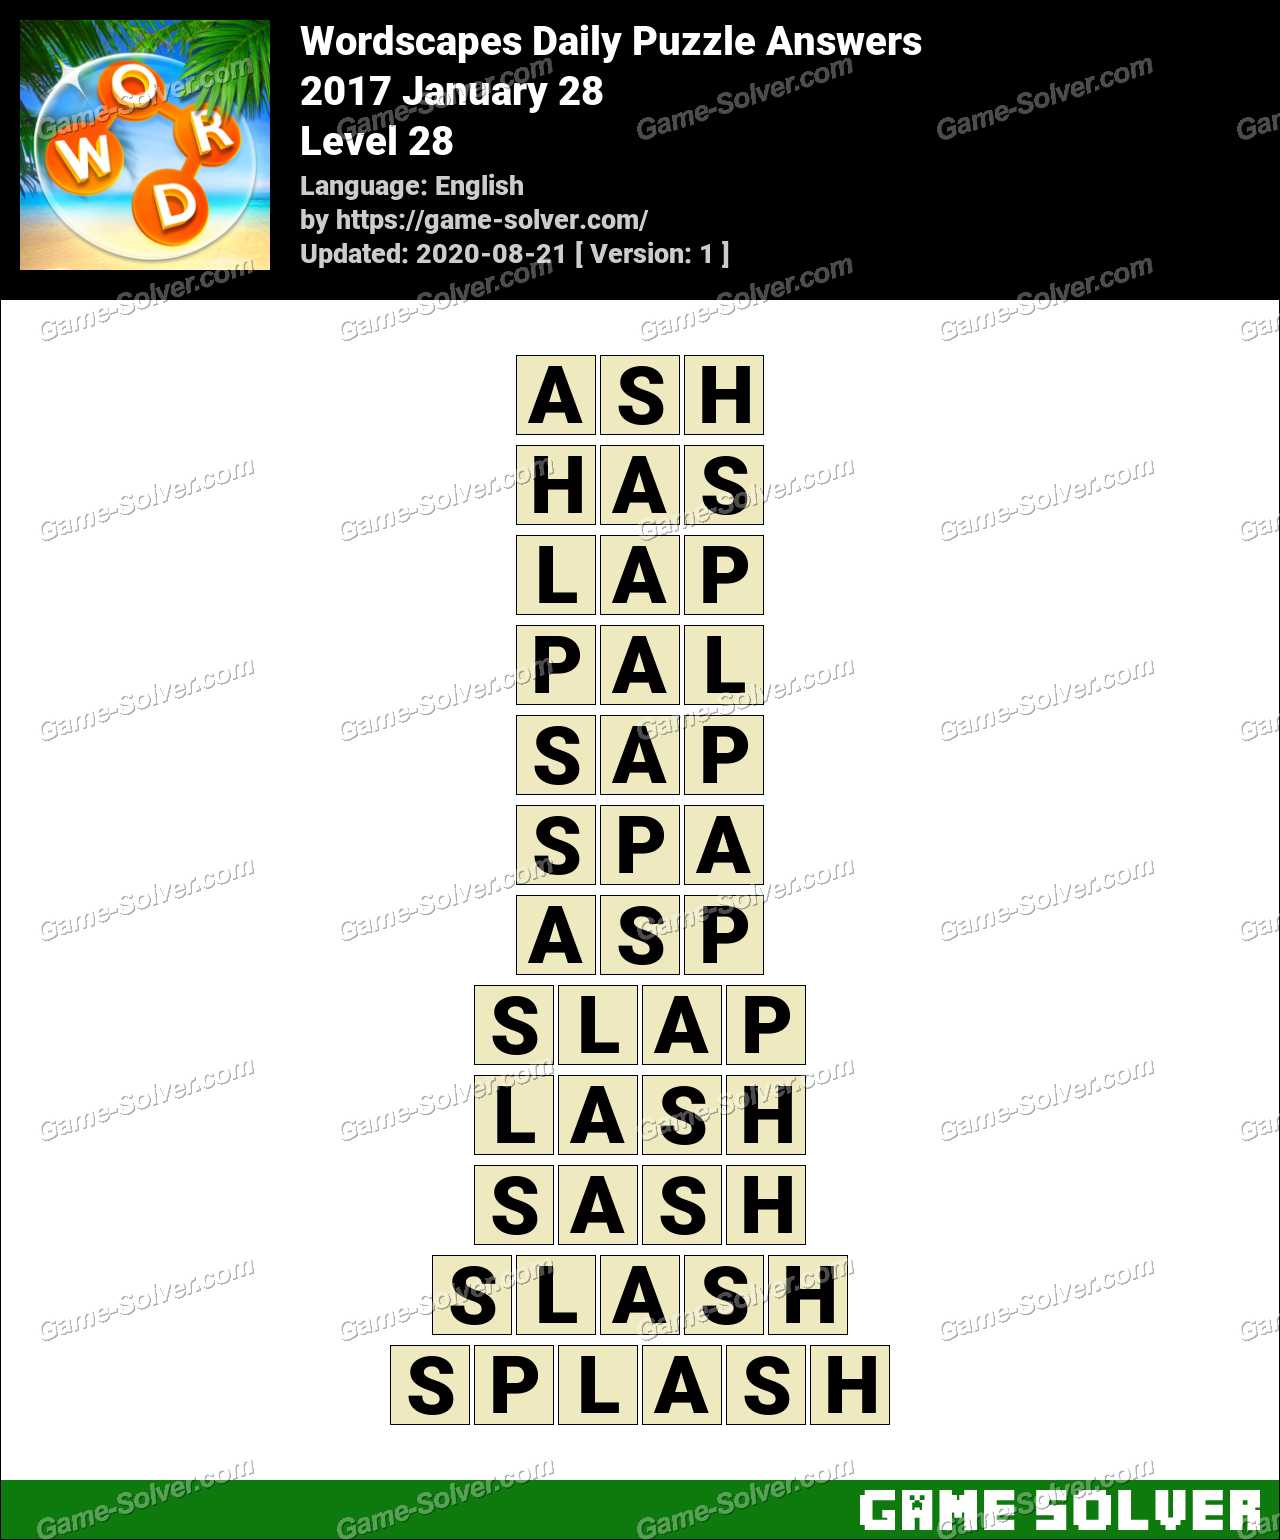 Wordscapes Daily Puzzle 2017 January 28 Answers